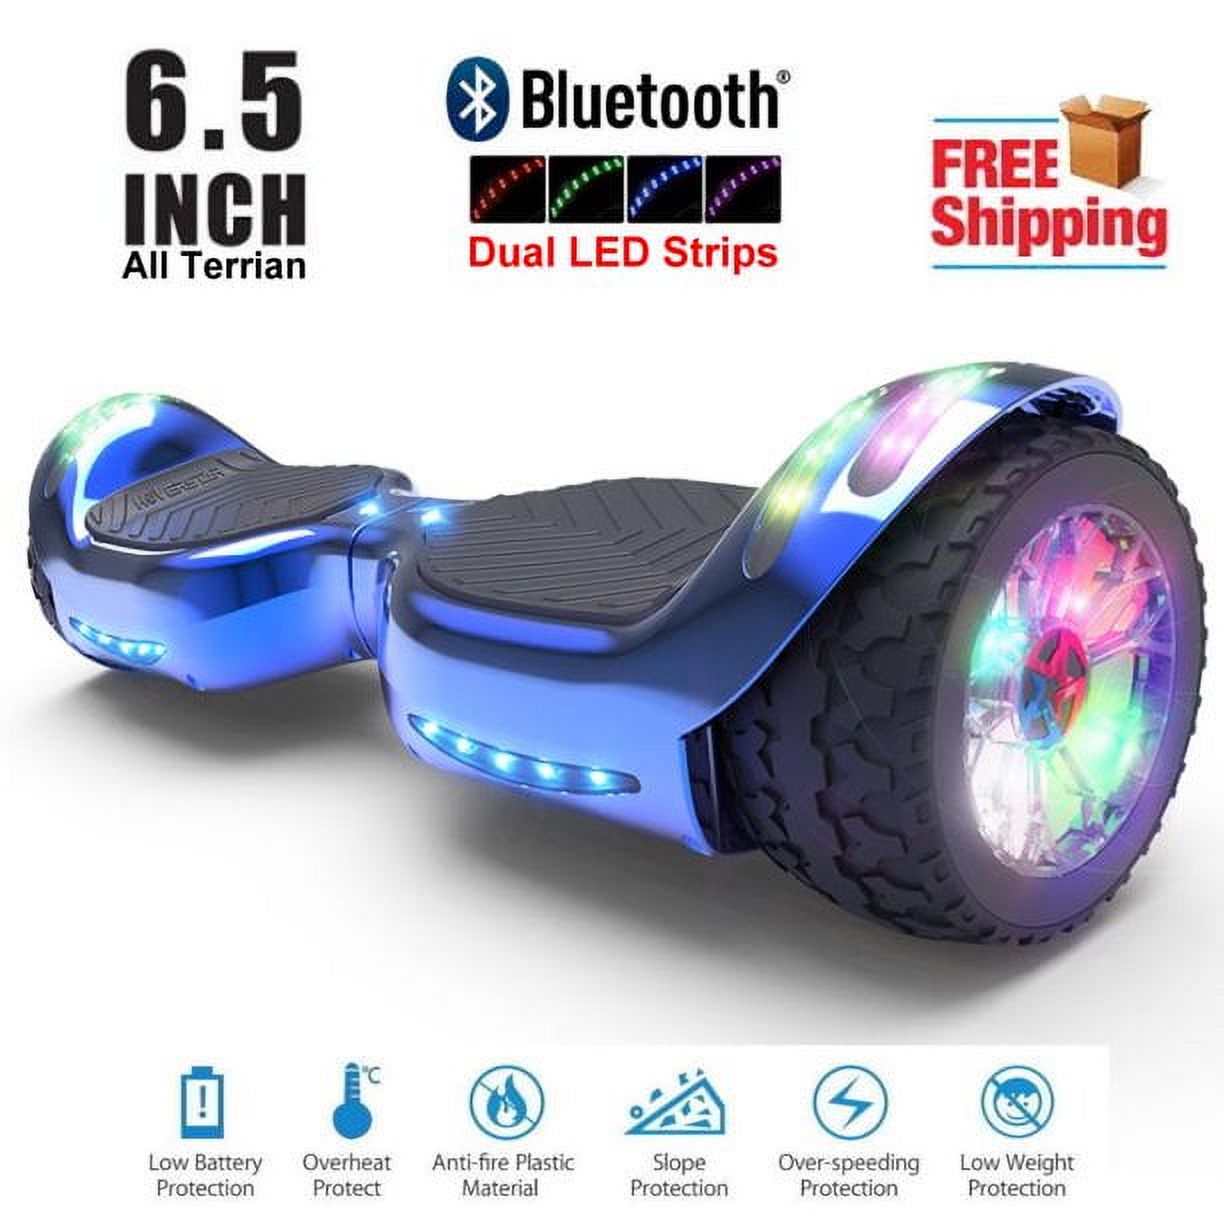 Hoverboard All-Terrain LED Flash Wide All Terrian Wheel with Bluetooth Speaker Dual LED Light Self Balancing Wheel Electric Scooter Chrome Blue - image 1 of 5